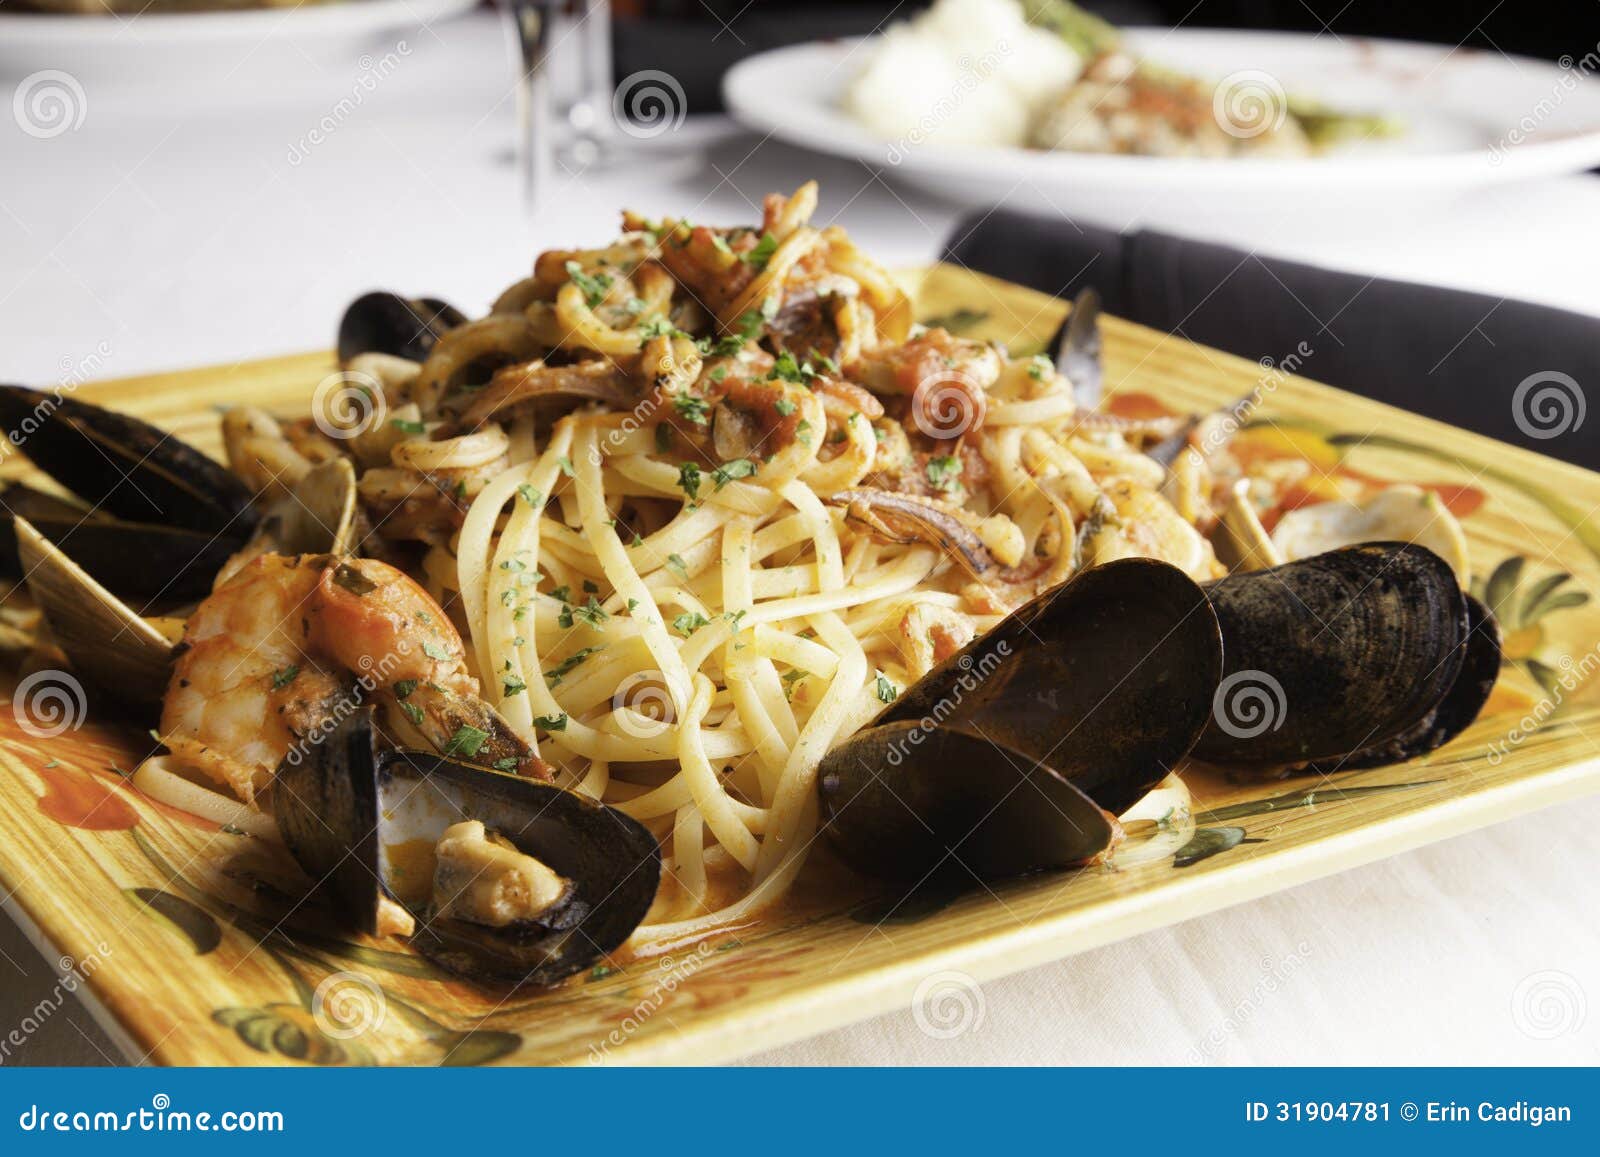 seafood fra diavolo with linguine 2